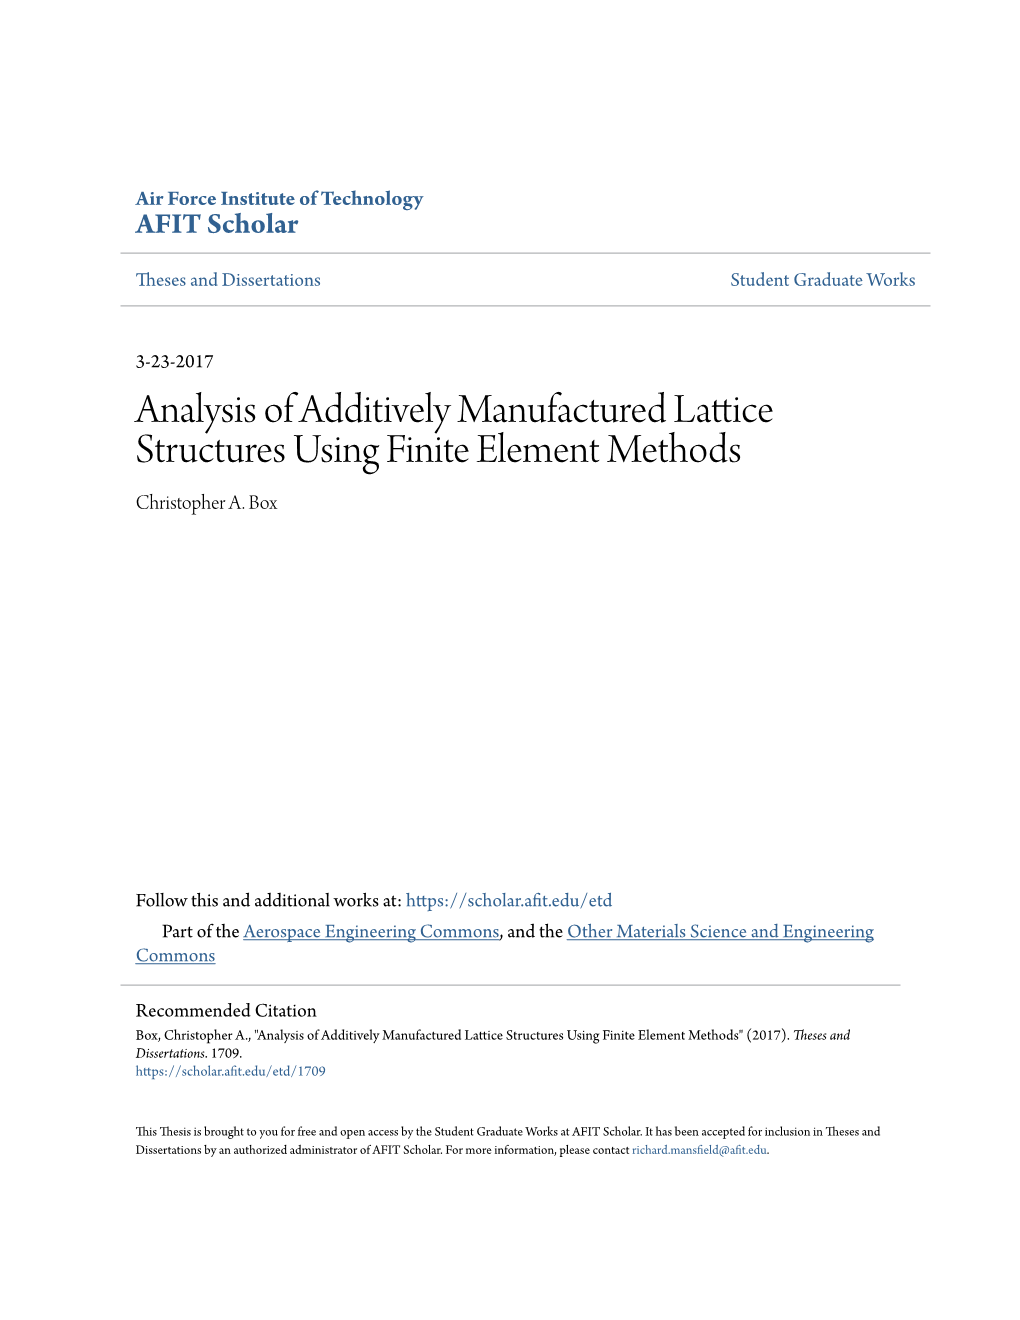 Analysis of Additively Manufactured Lattice Structures Using Finite Element Methods Christopher A